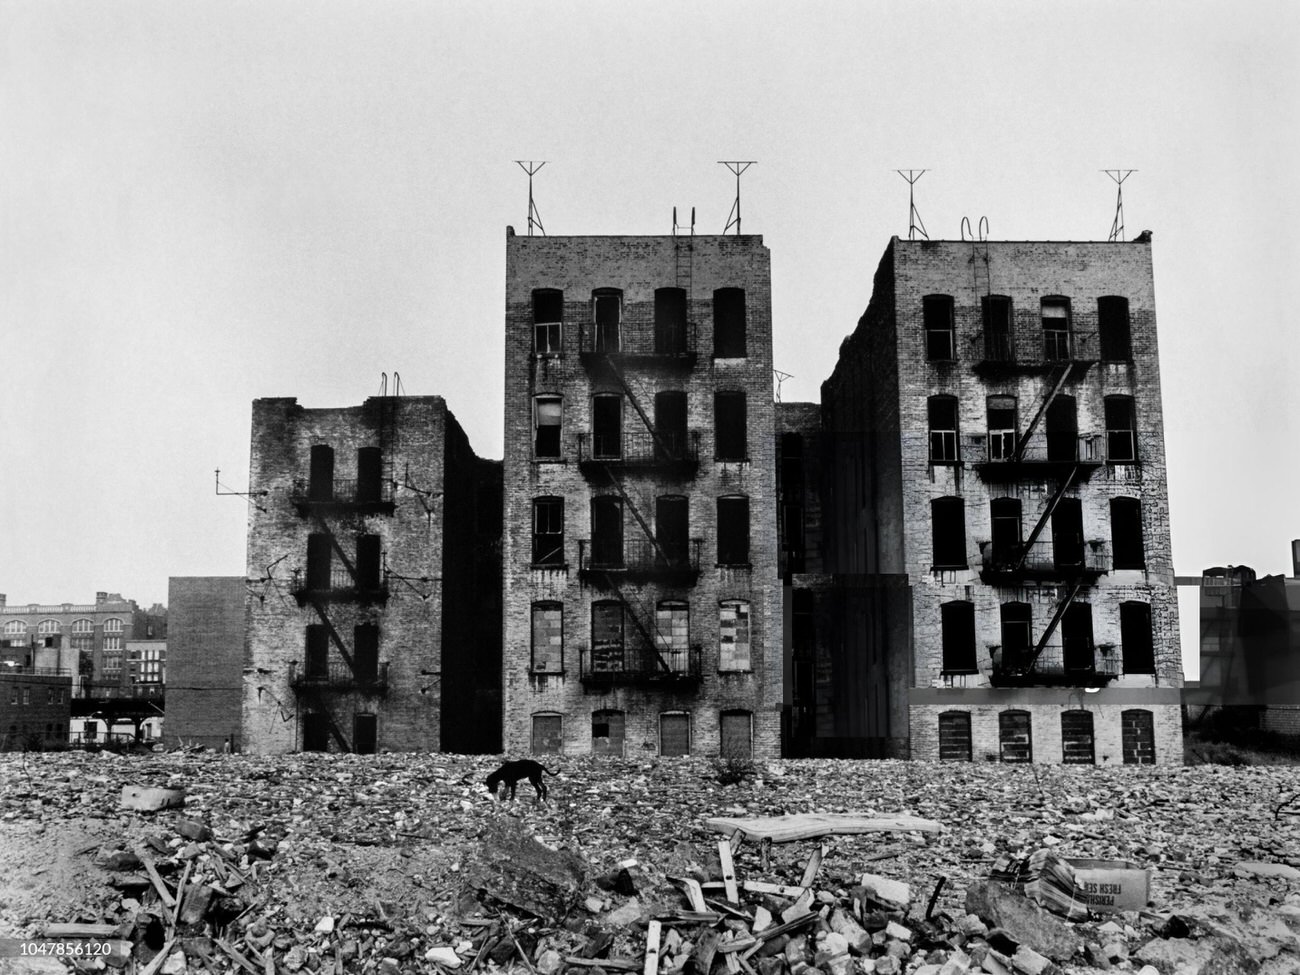 Abandoned Apartment Buildings Amid Rubble With A Stray Dog In The South Bronx Are Shown, 1977.